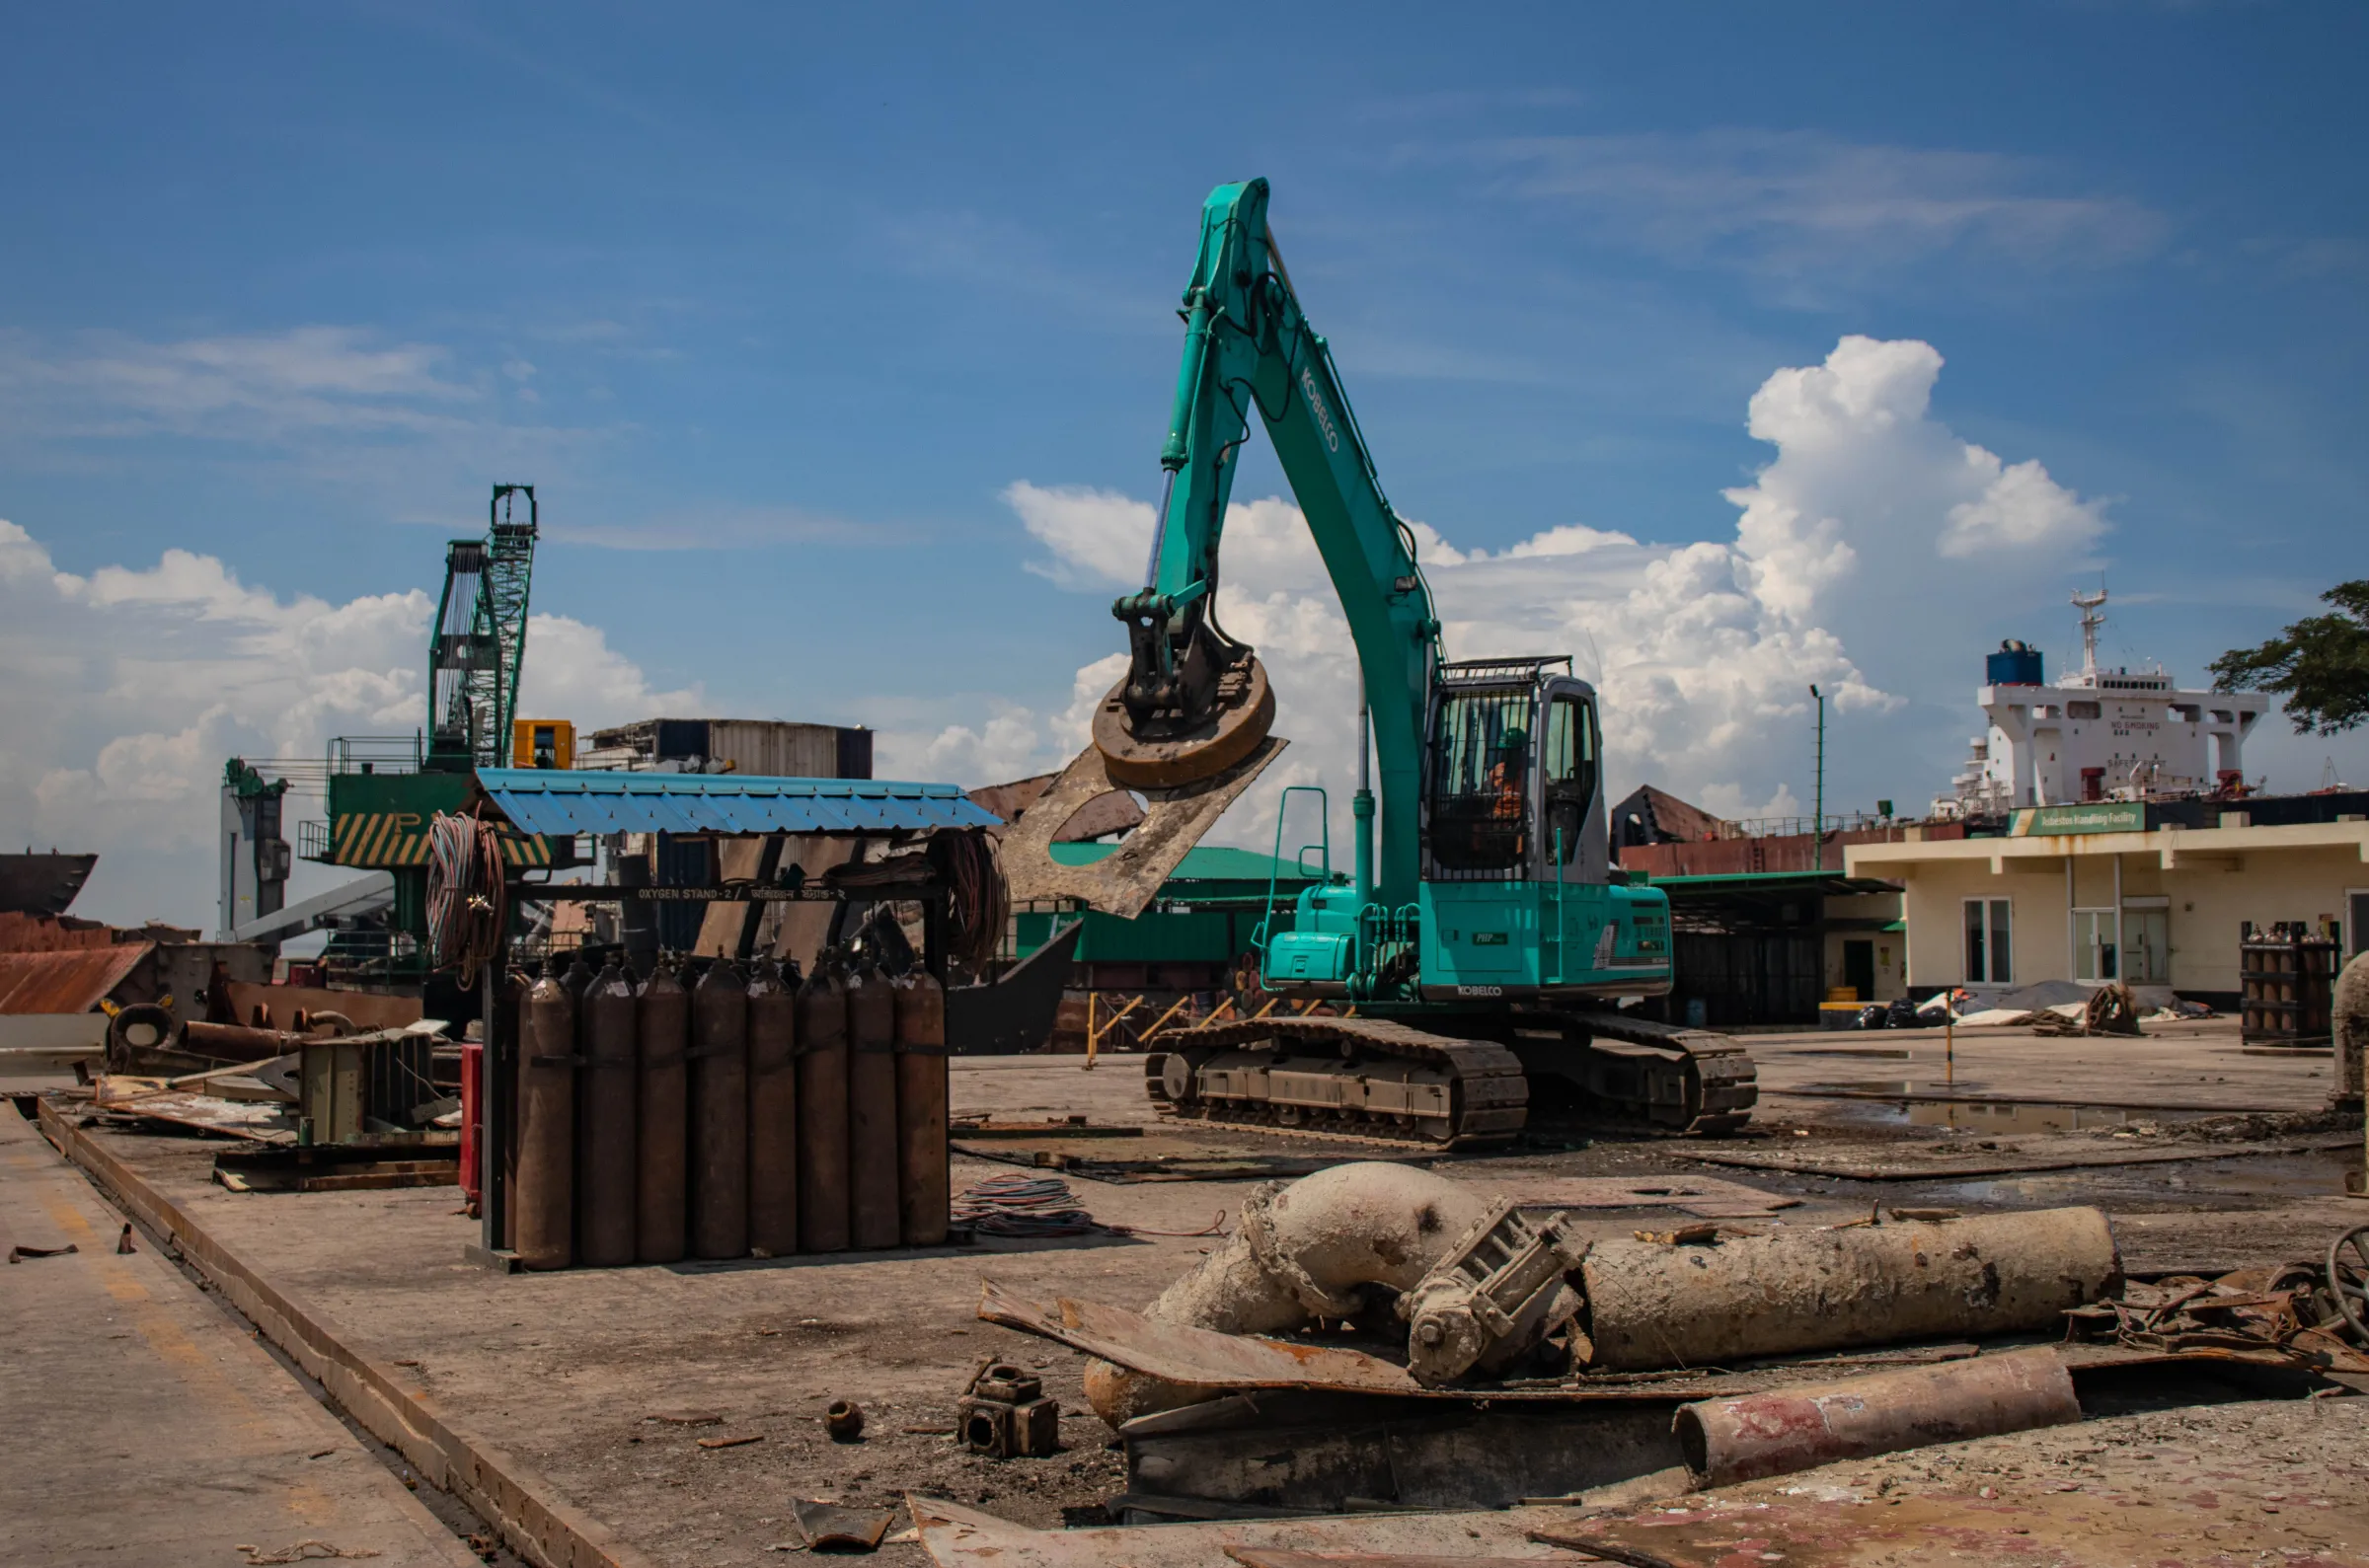 A magnetic crane transferring parts of a ship at the PHP Shipbreaking Yard in Chattogram, Bangladesh on September 23, 2021